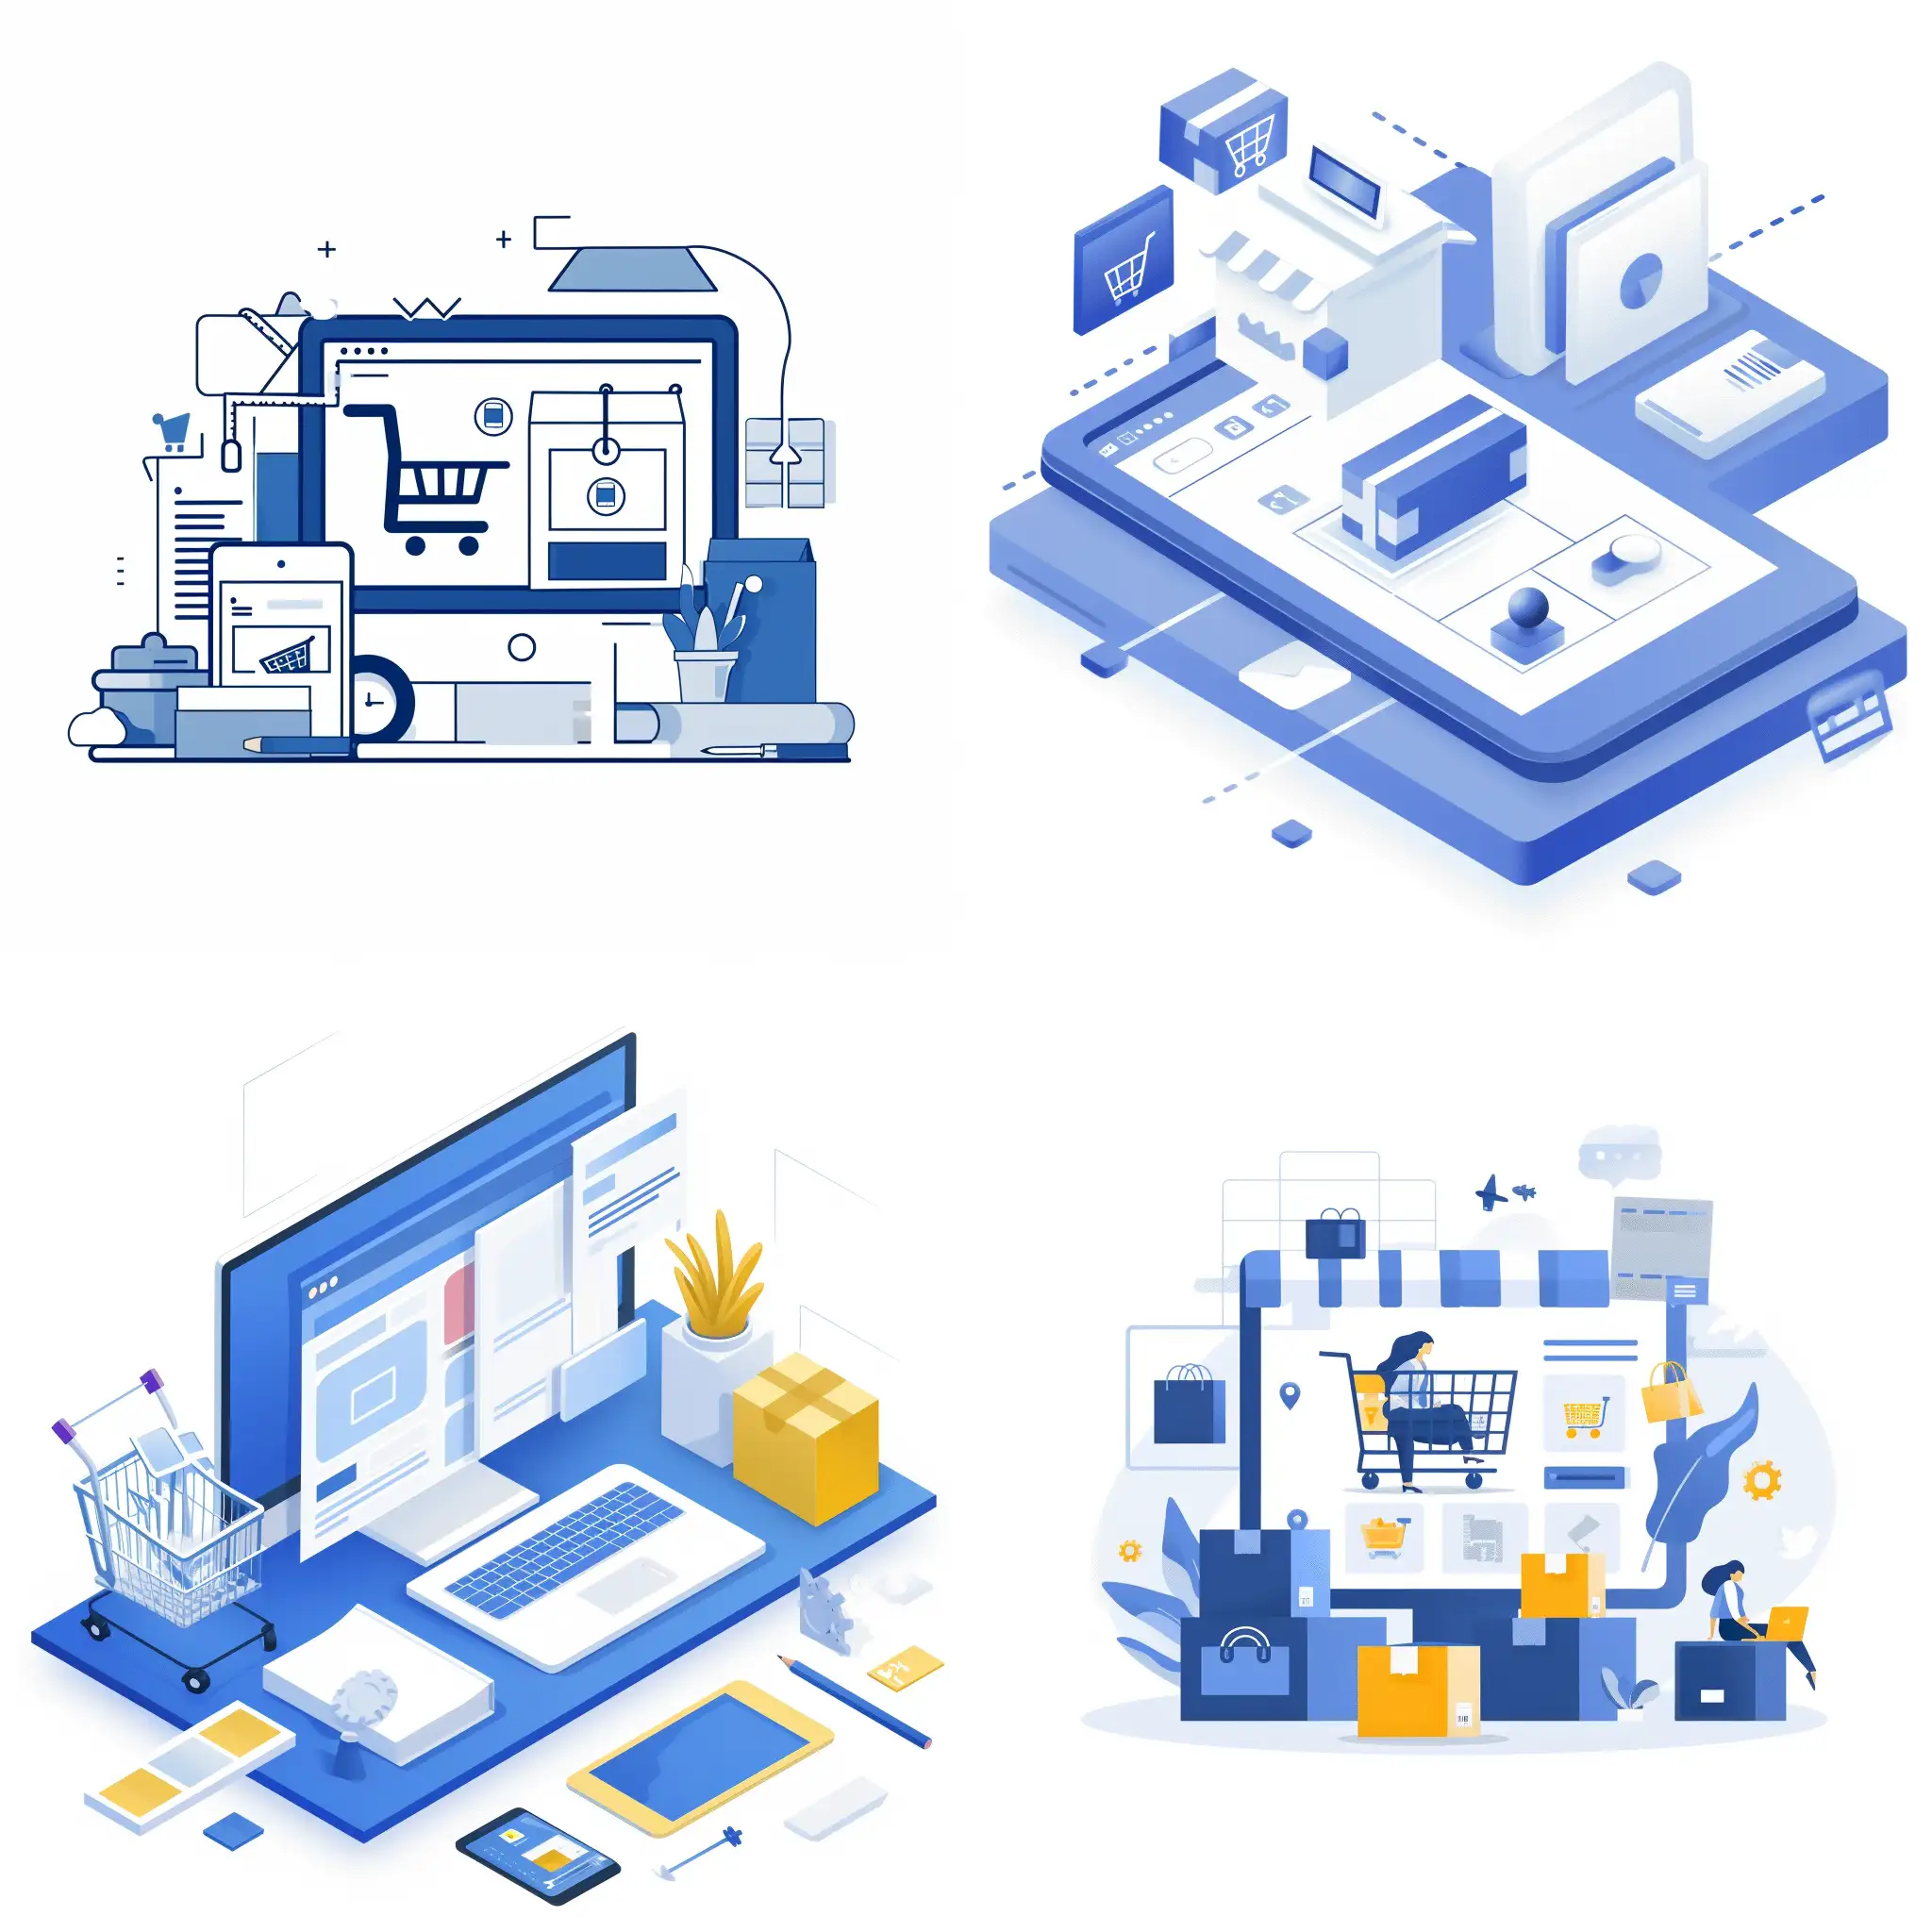 illustration a minimal graphic image about building a website with ecommerce builder with plain white background and blue color pallet in design (Code: FFFF)